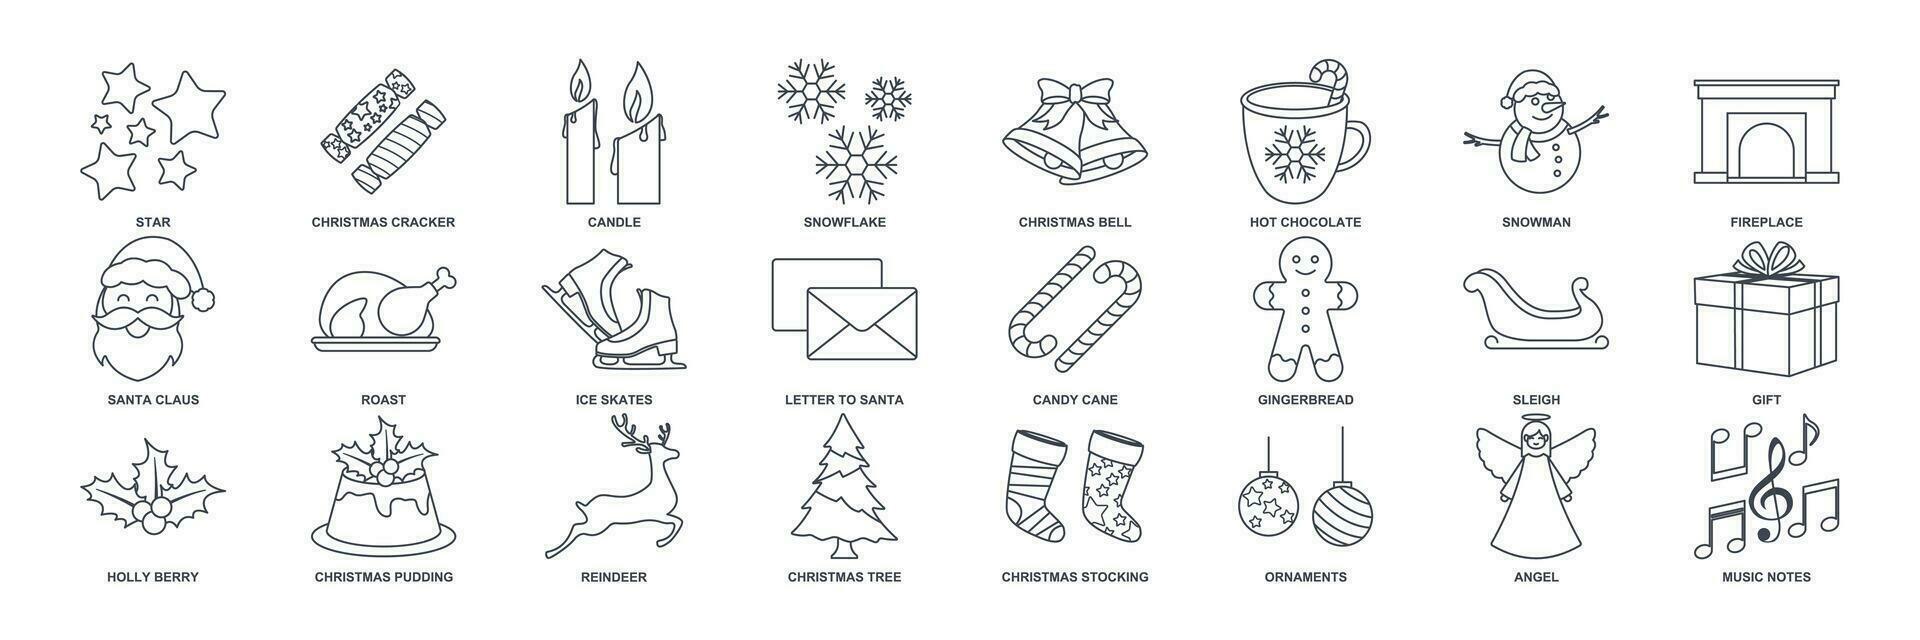 Christmas and New Year icon set, Included icons as Christmas Tree, Santa Claus, Hot Chocolate and more symbols collection, logo isolated vector illustration